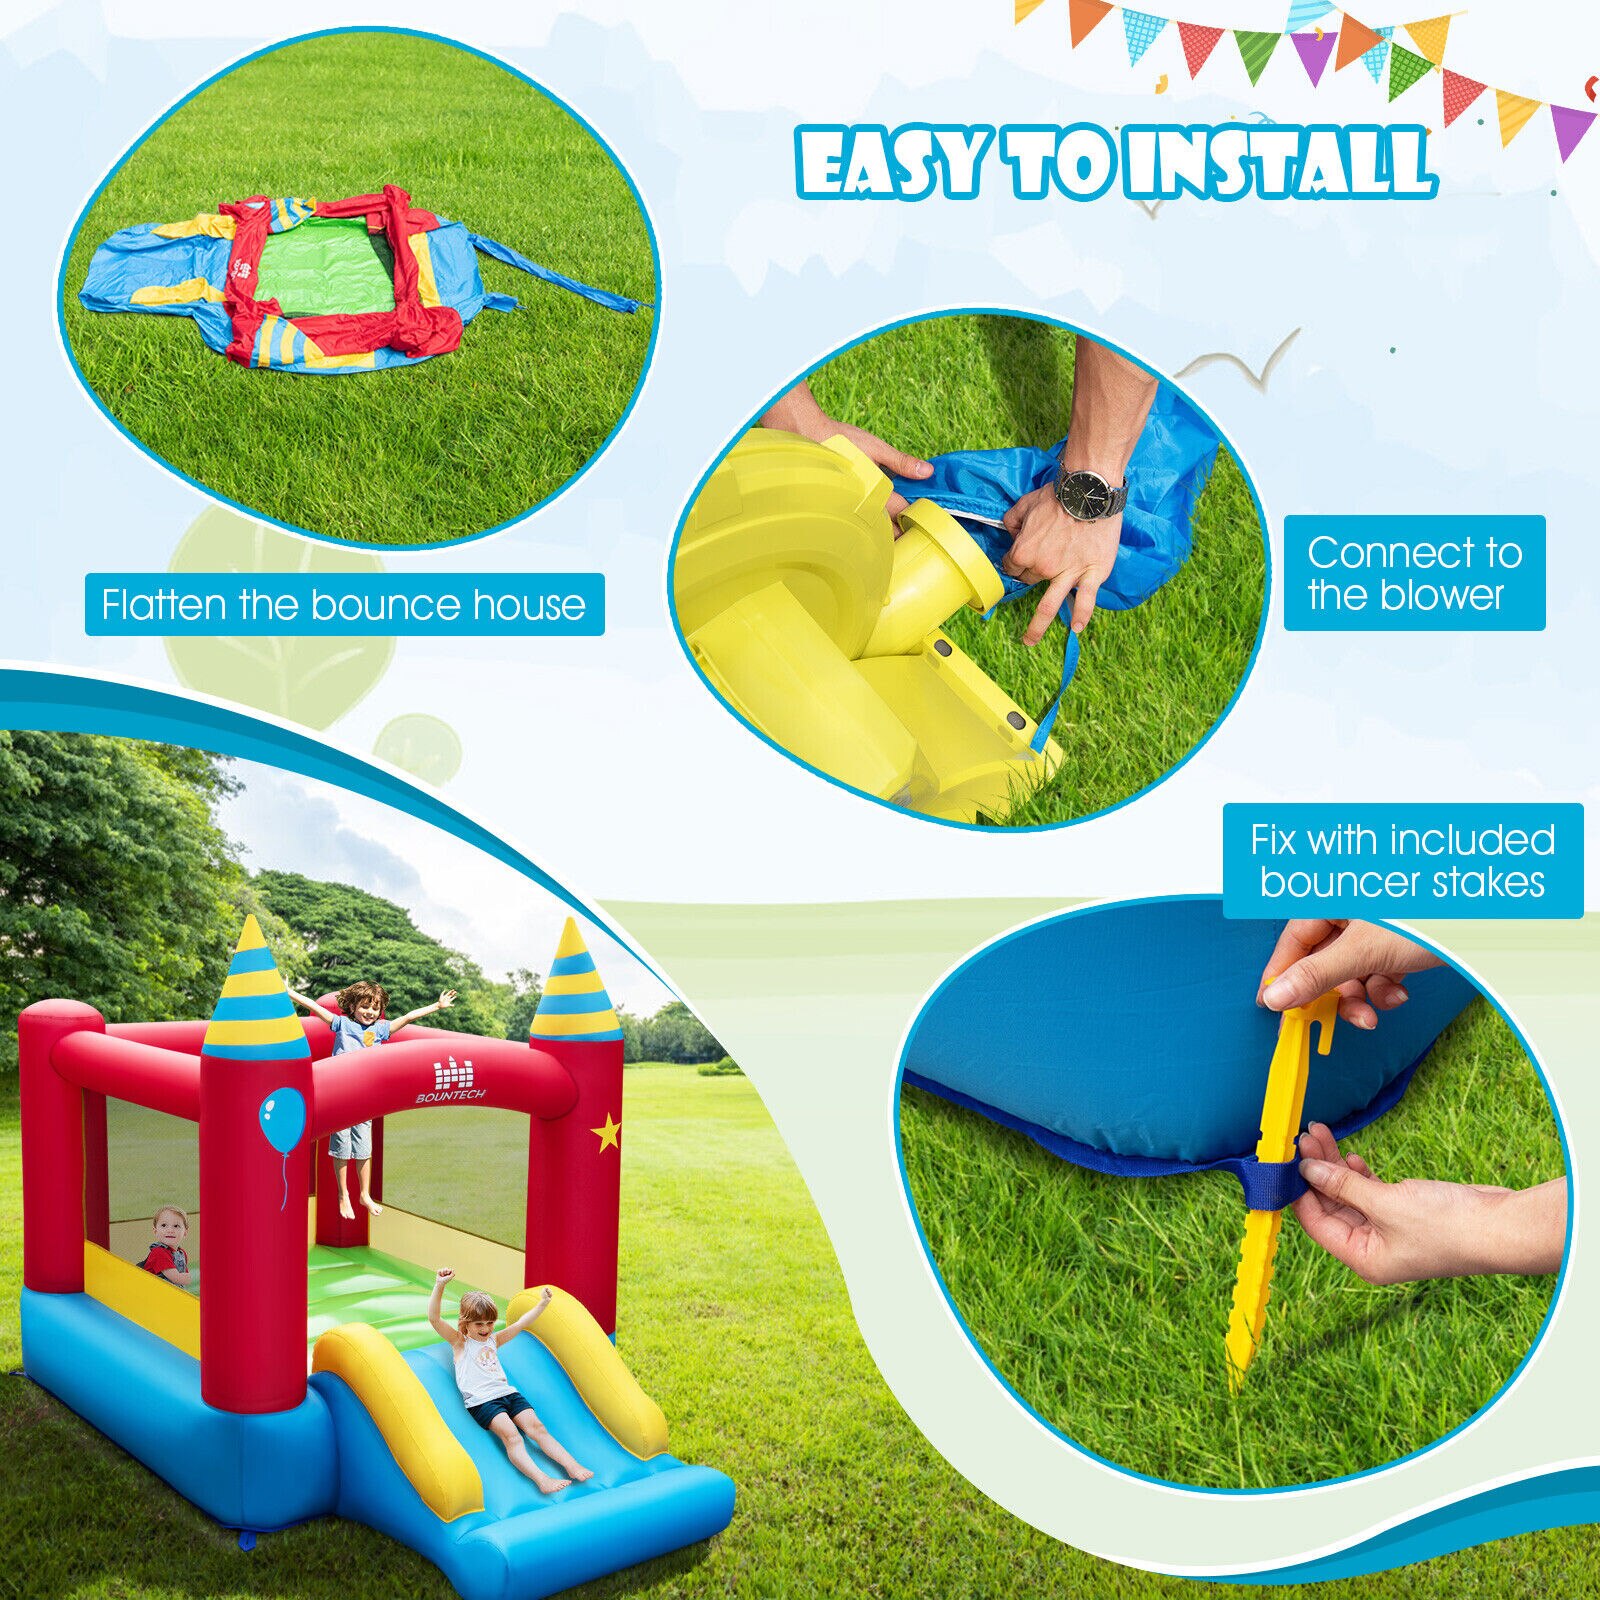 Costway-Inflatable-Bounce-Castle-Kids-Jumping-Bouncer-Indoor-Outdoor-Blower-Excluded-5